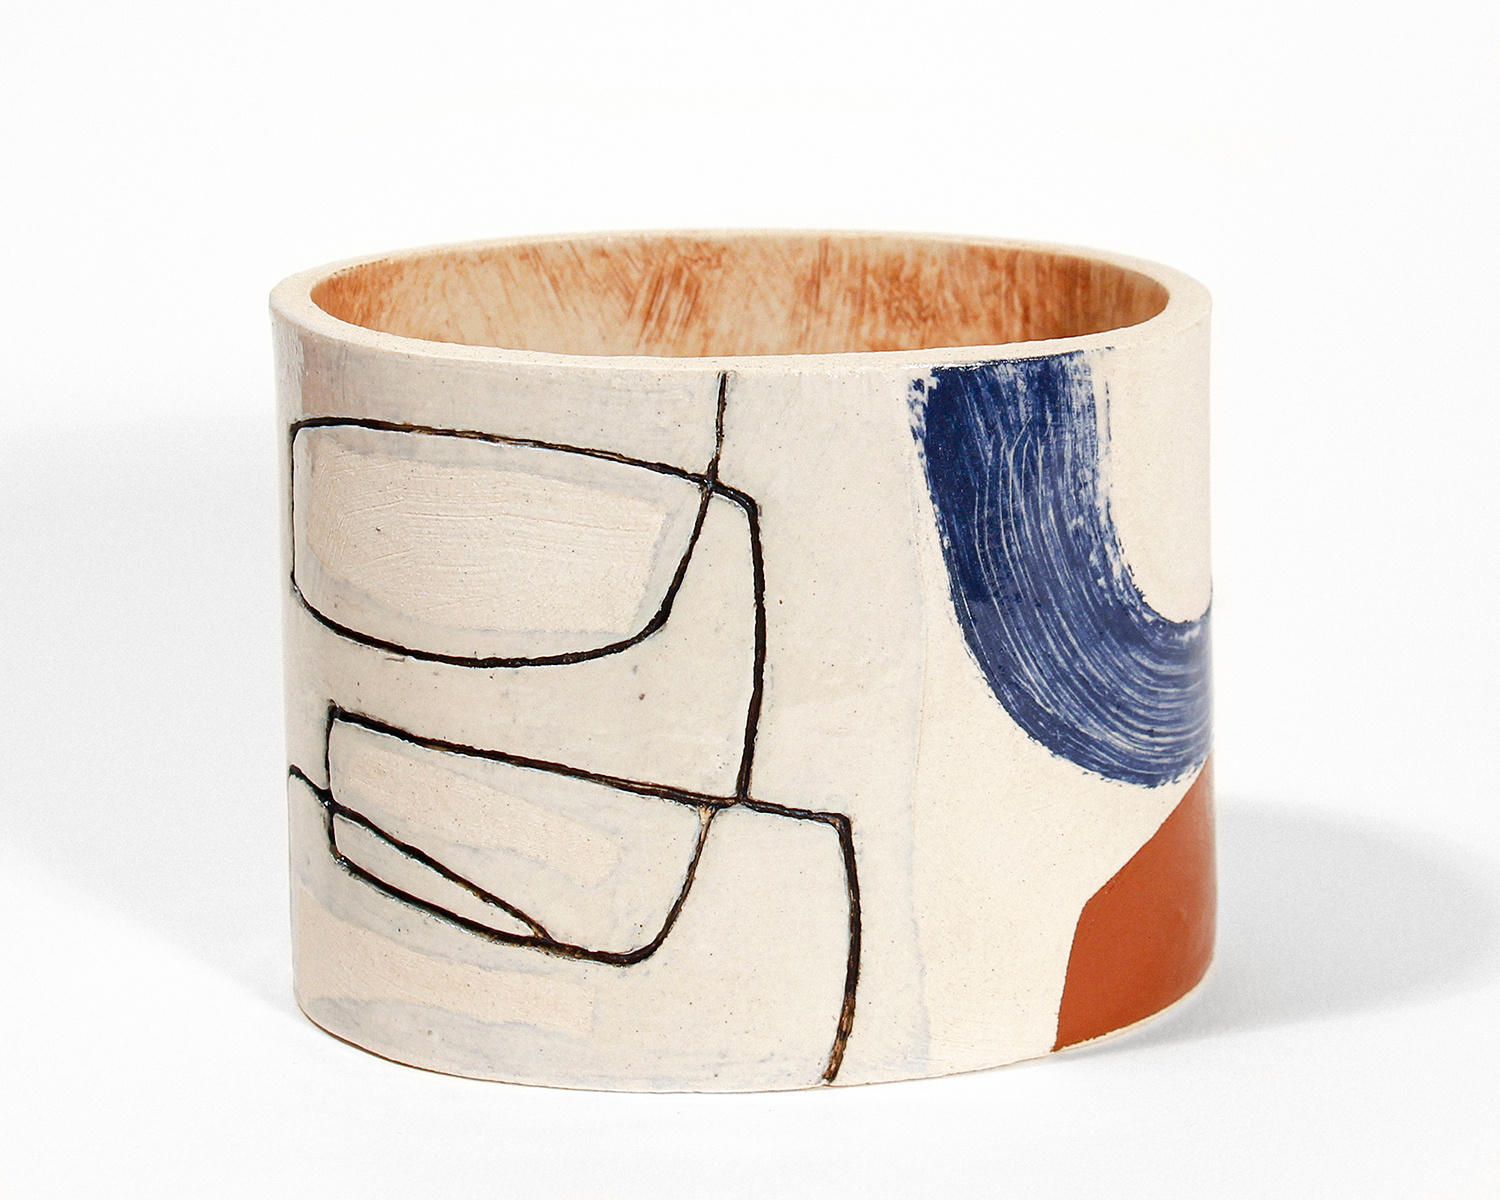 Medium Oval Vessel by Louise McNiff